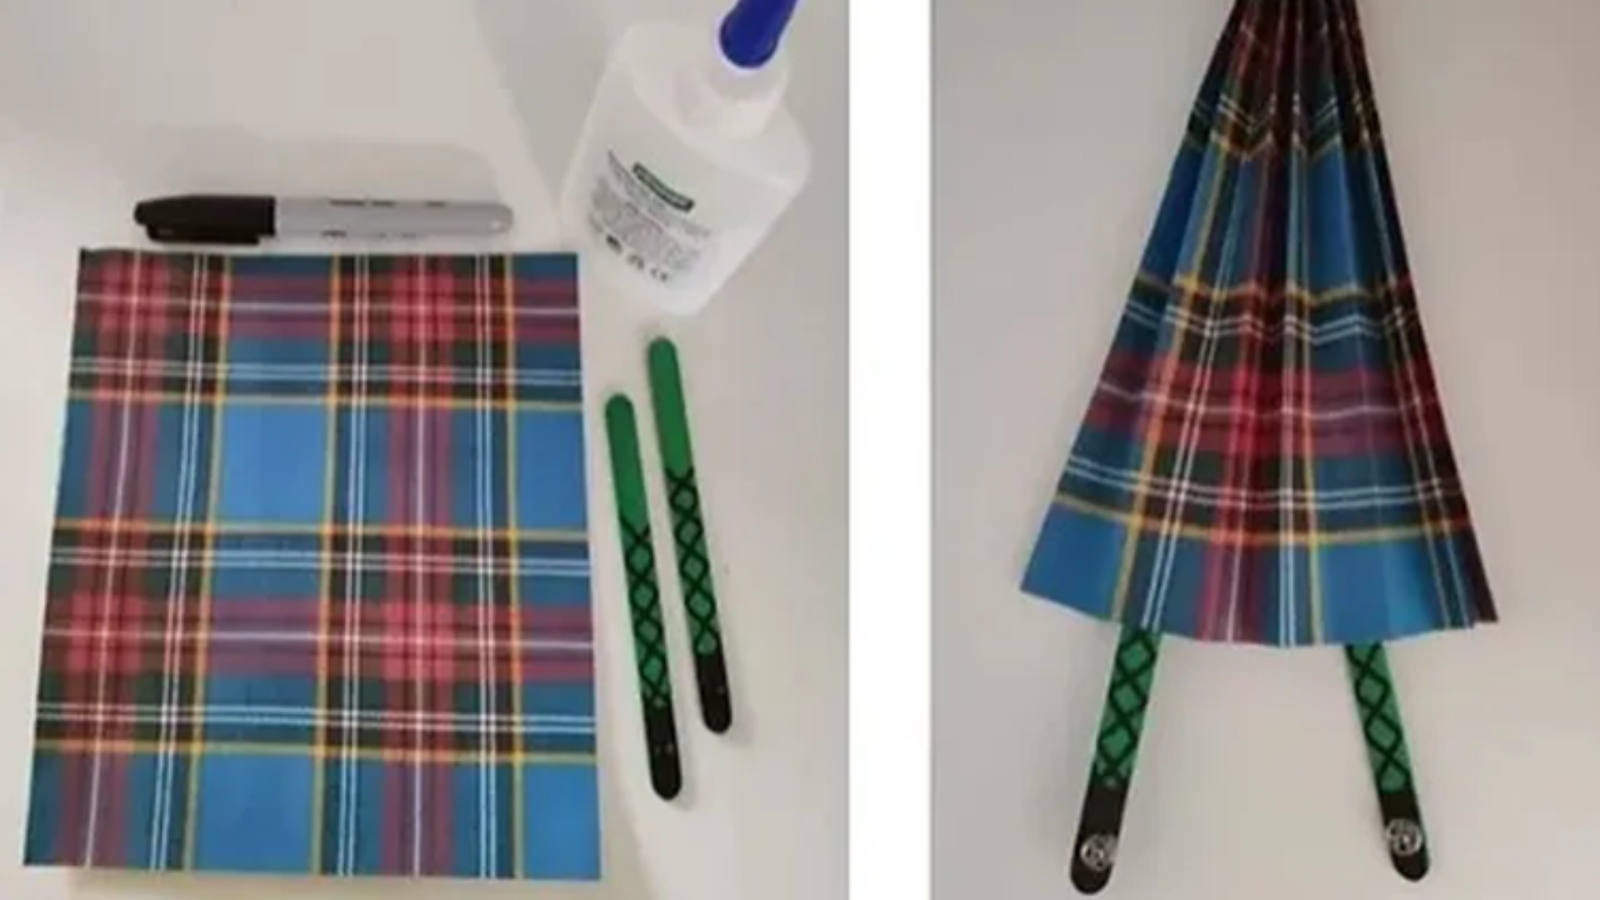 Tartan fabric craft transformation with pens and glue.